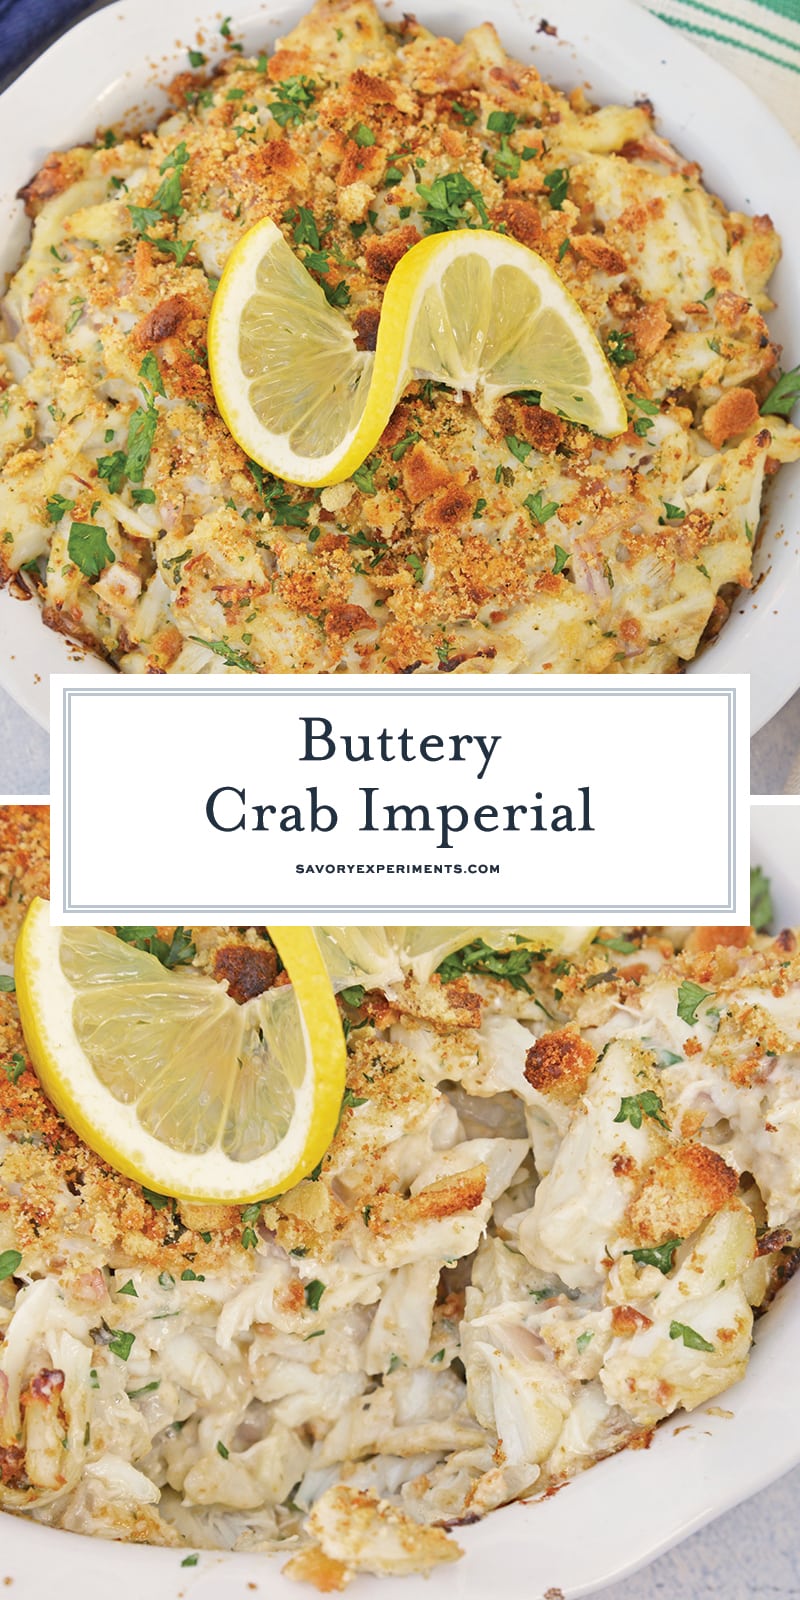 Buttery Crab Imperial + VIDEO (Buttery & Creamy Jumbo Lump Crab)